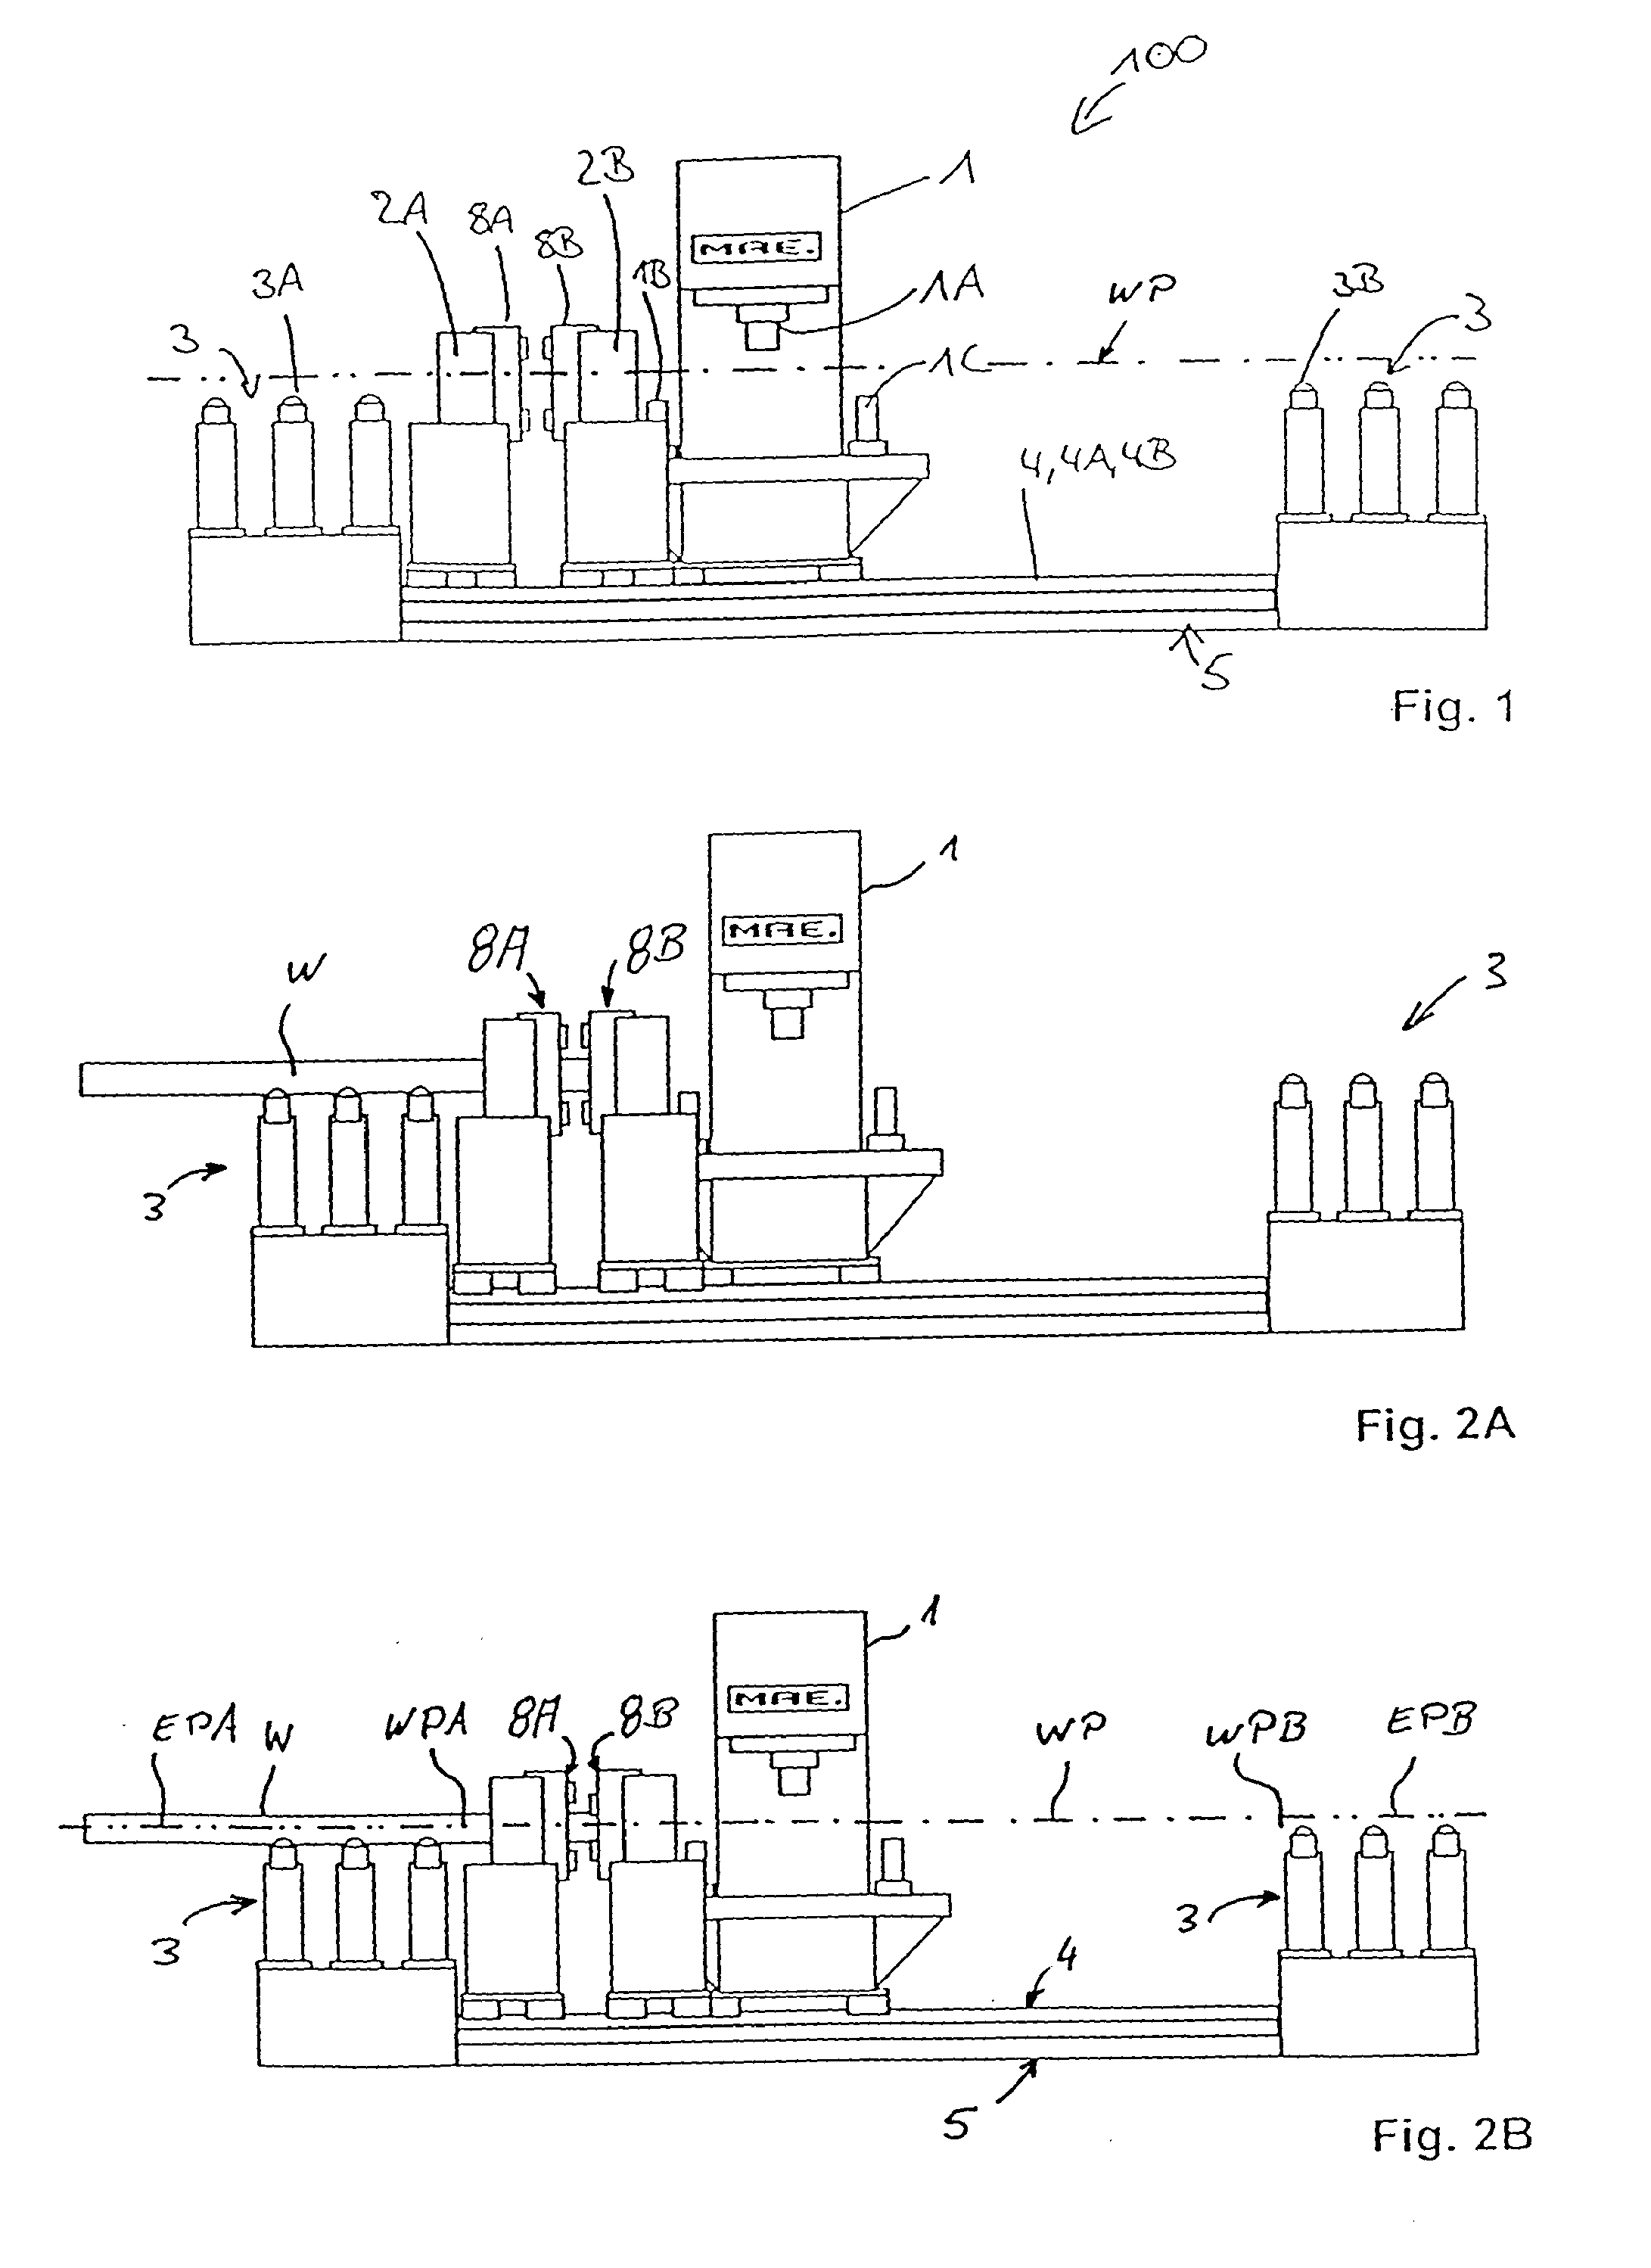 Bending-straightening machine for a long workpiece, device for feeding in and removing said workpiece and method for bend-straightening long workpieces